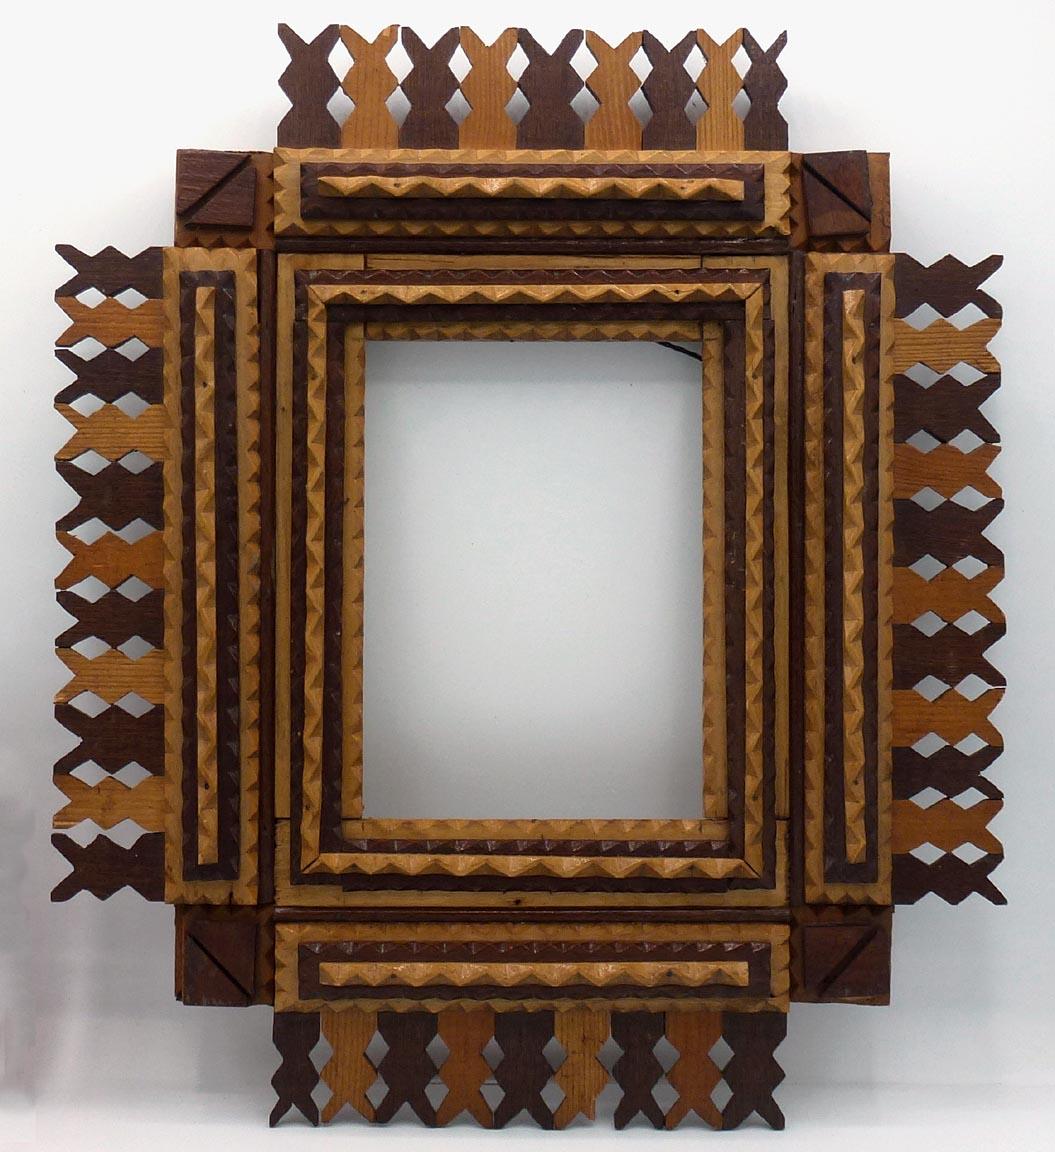 This is a tramp art frame with a very attractive design of light and dark woods, and a pieced openwork border. It has a clear, somewhat glossy lacquer or varnish finish. The condition is excellent, with one very small chip missing on the lower